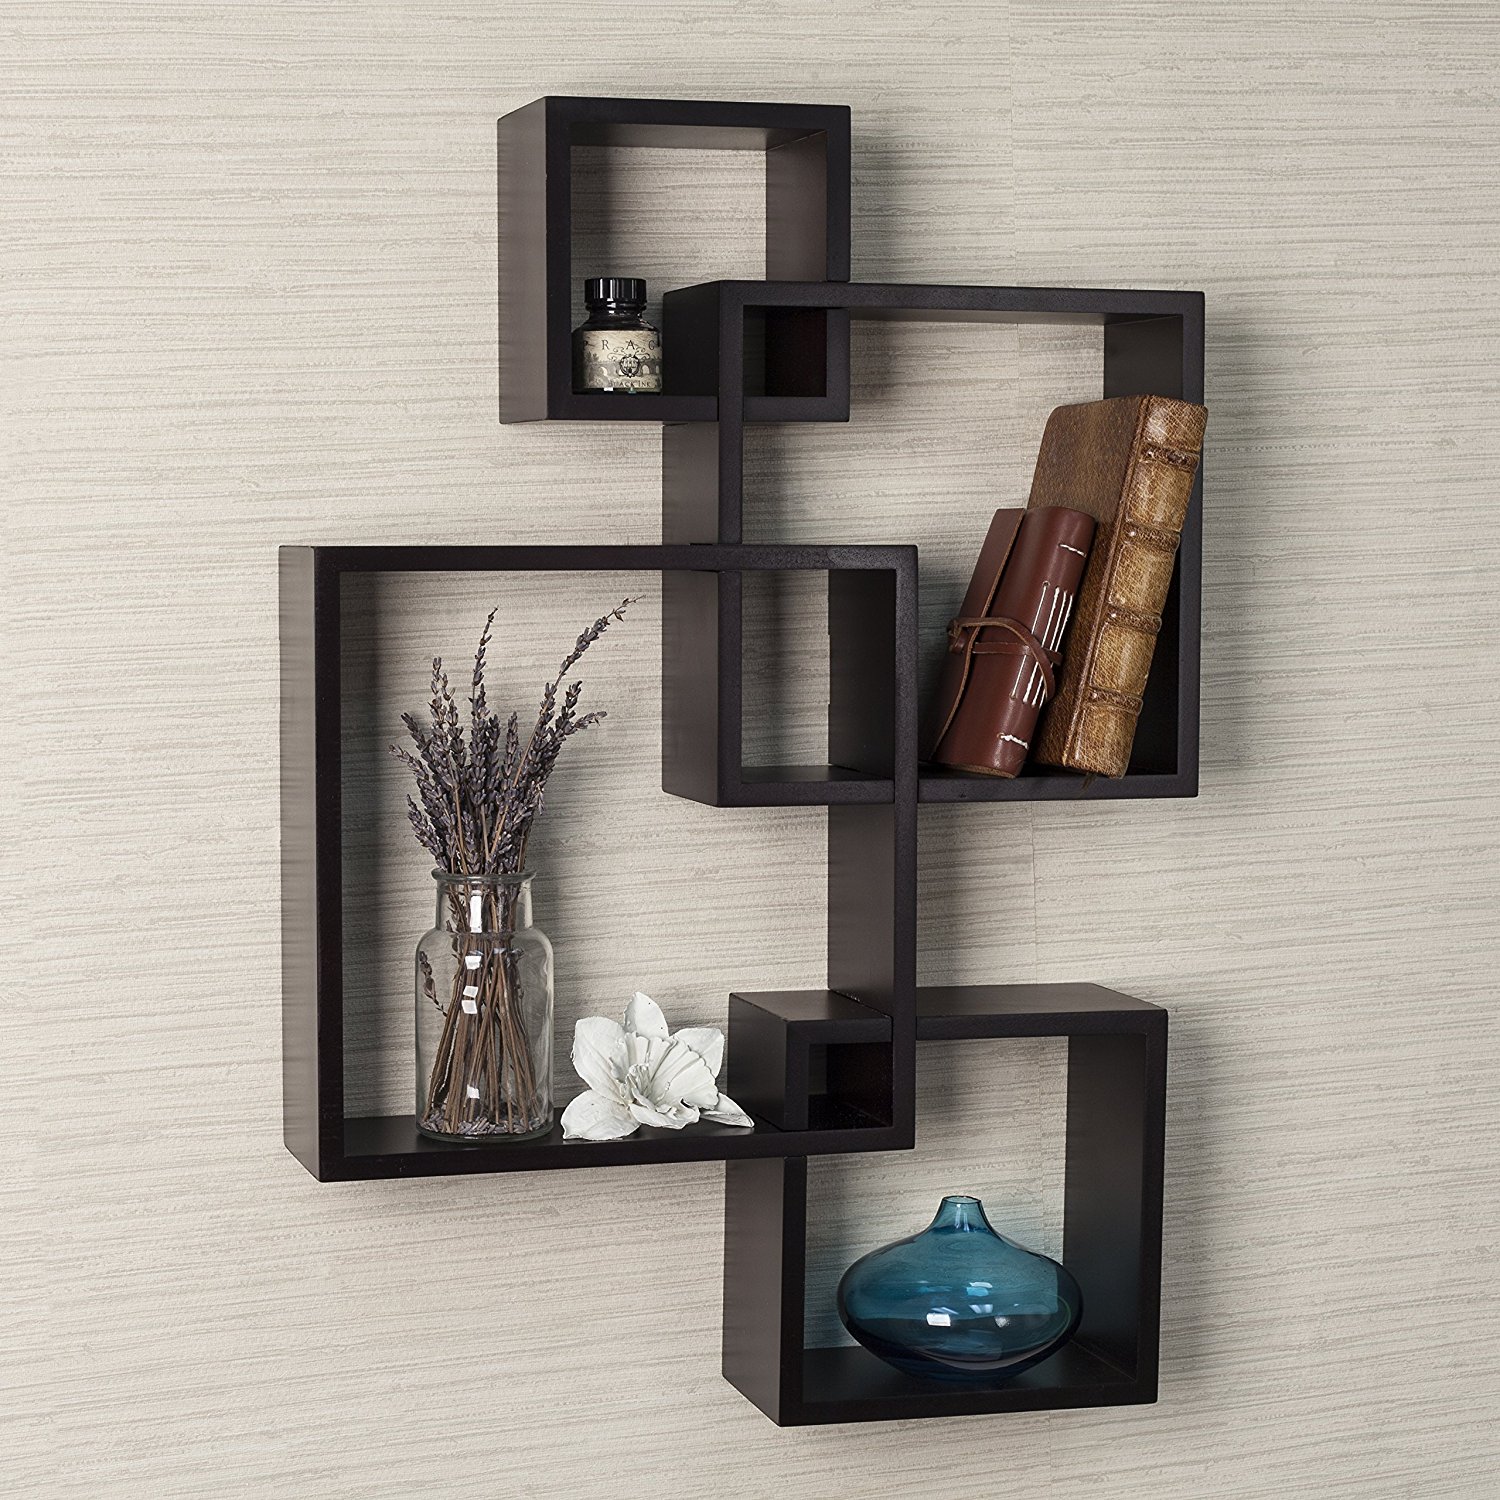 4 set Intersecting Squares Floating Shelf Wall Mounted Home Decor Furniture